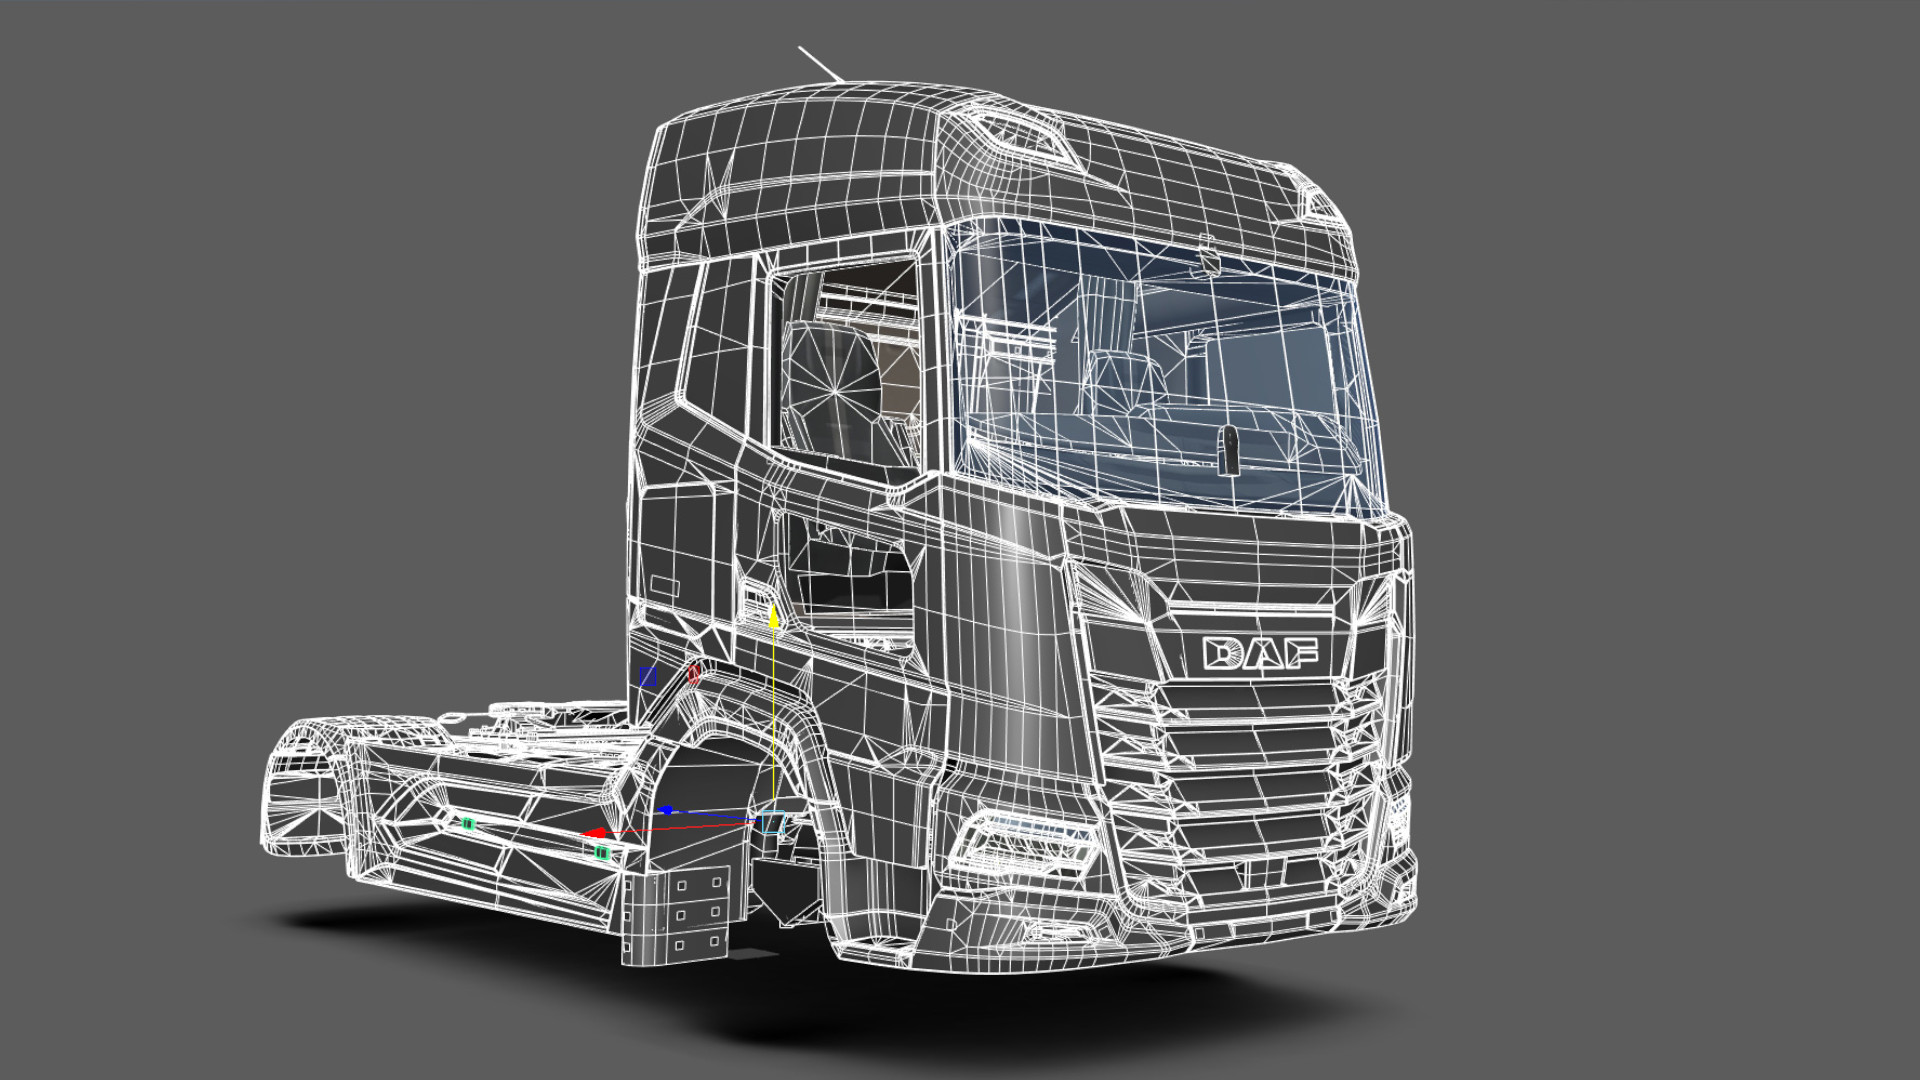 SCS Software's blog: Update to Scania Truck Driving Simulator coming soon